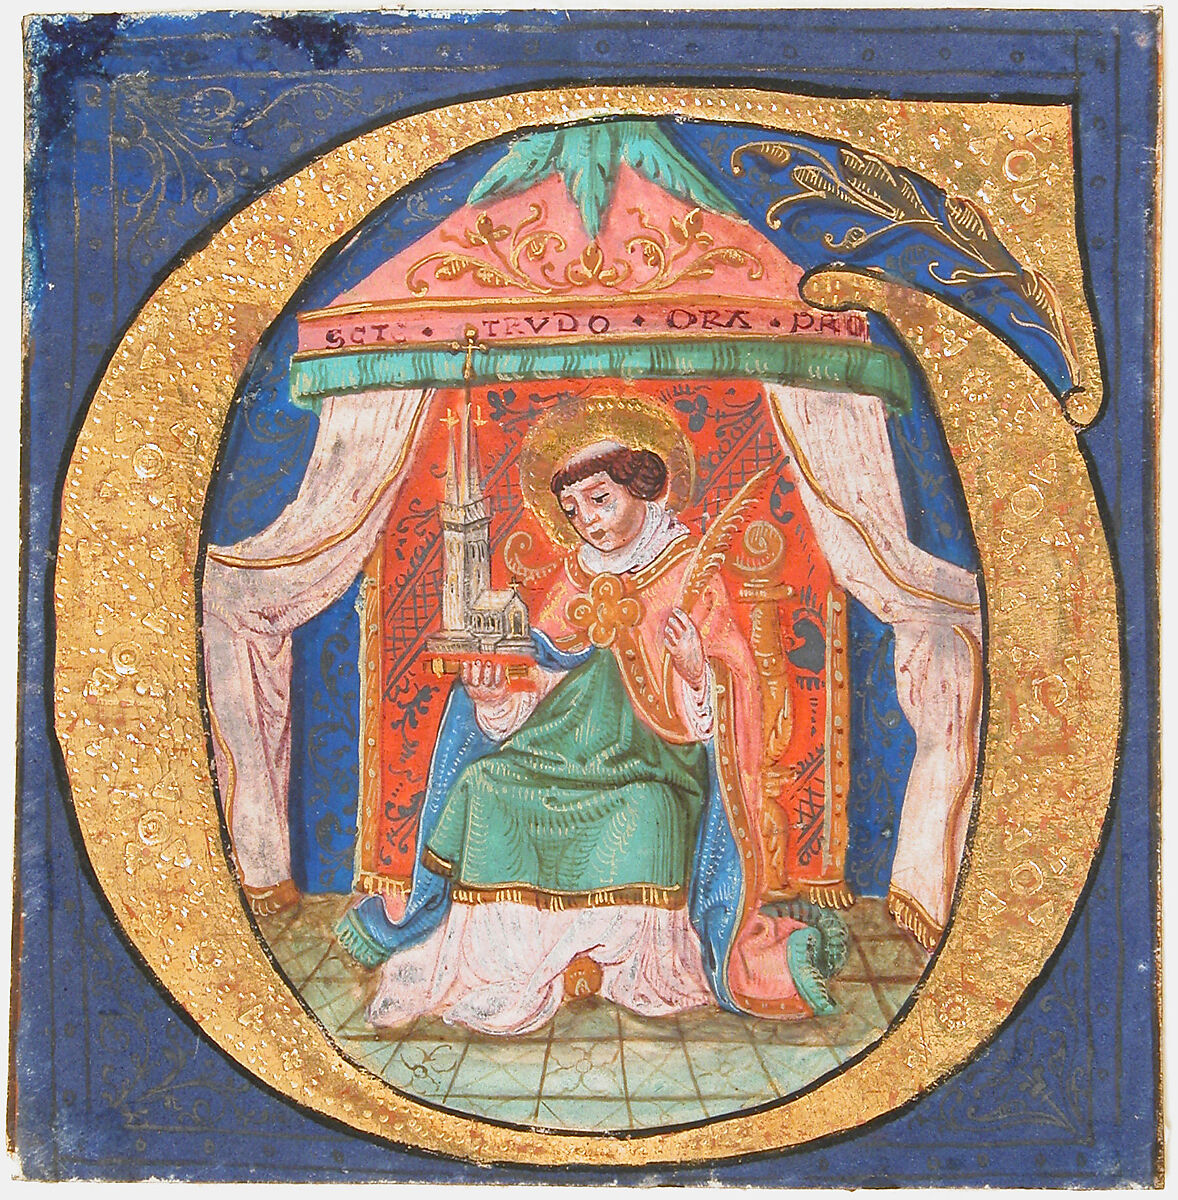 Manuscript Illumination with Saint Trudo (Trond) in an Initial O, from a Choir Book, Tempera, ink, and gold on parchment, German 